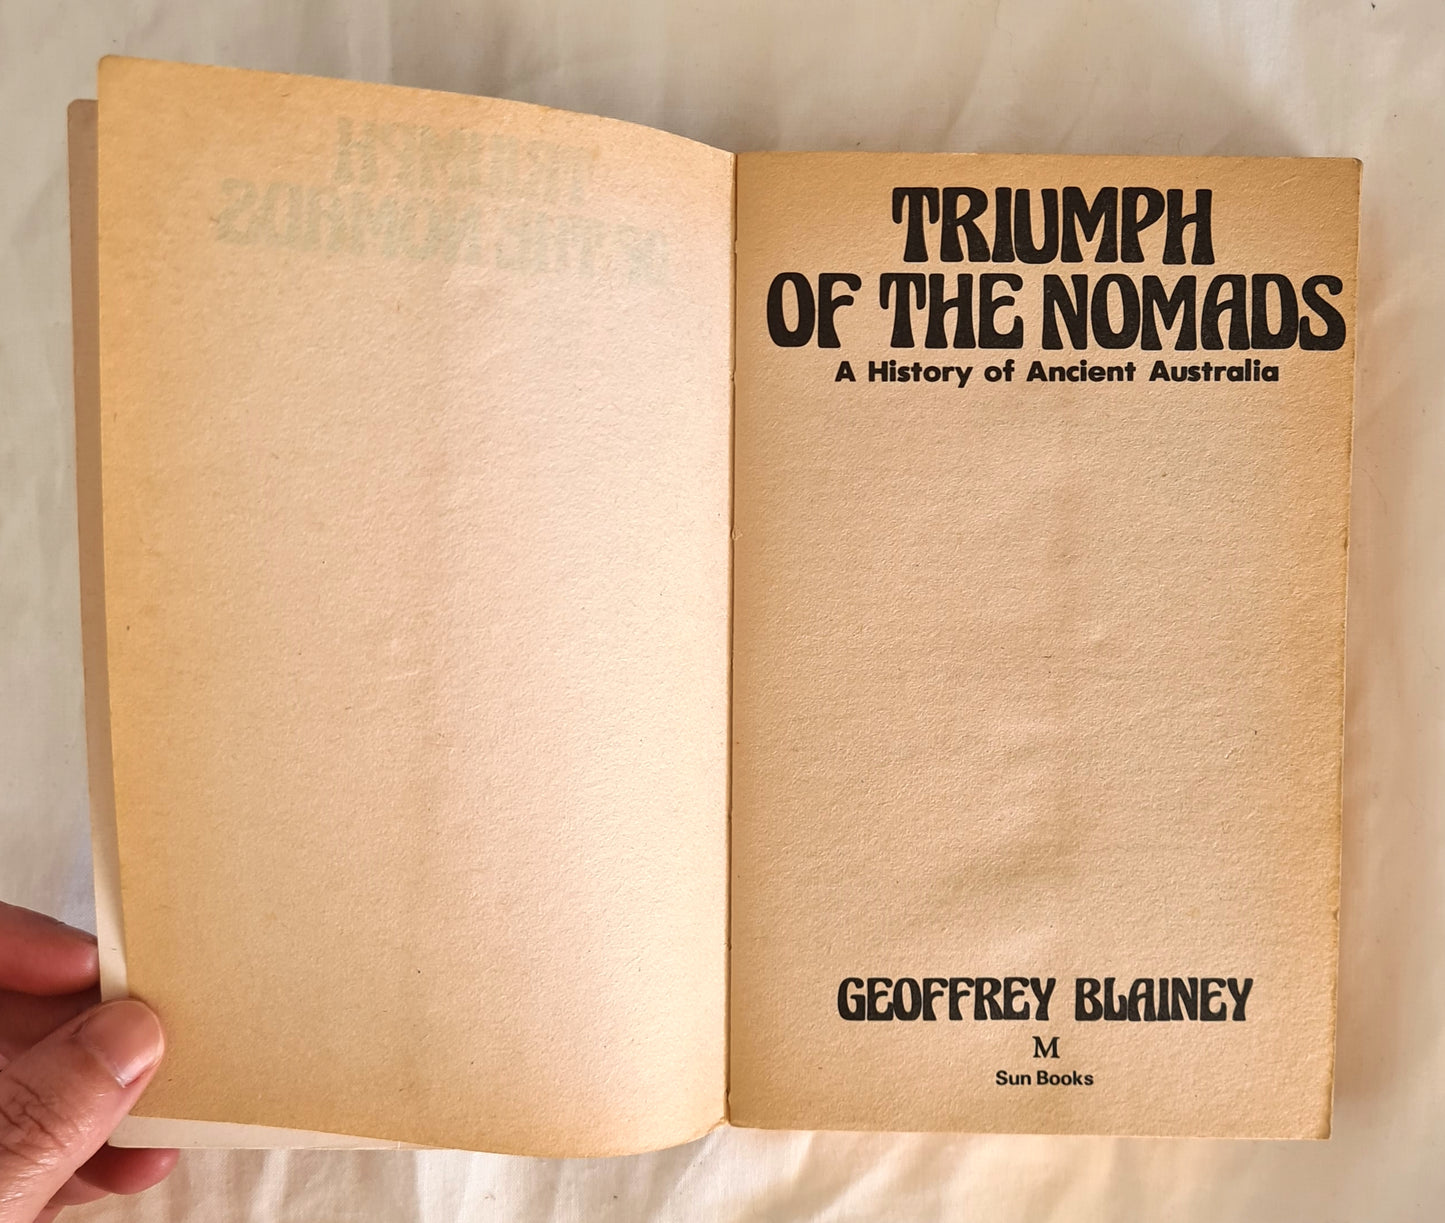 Triumph of the Nomads by Geoffrey Blainey